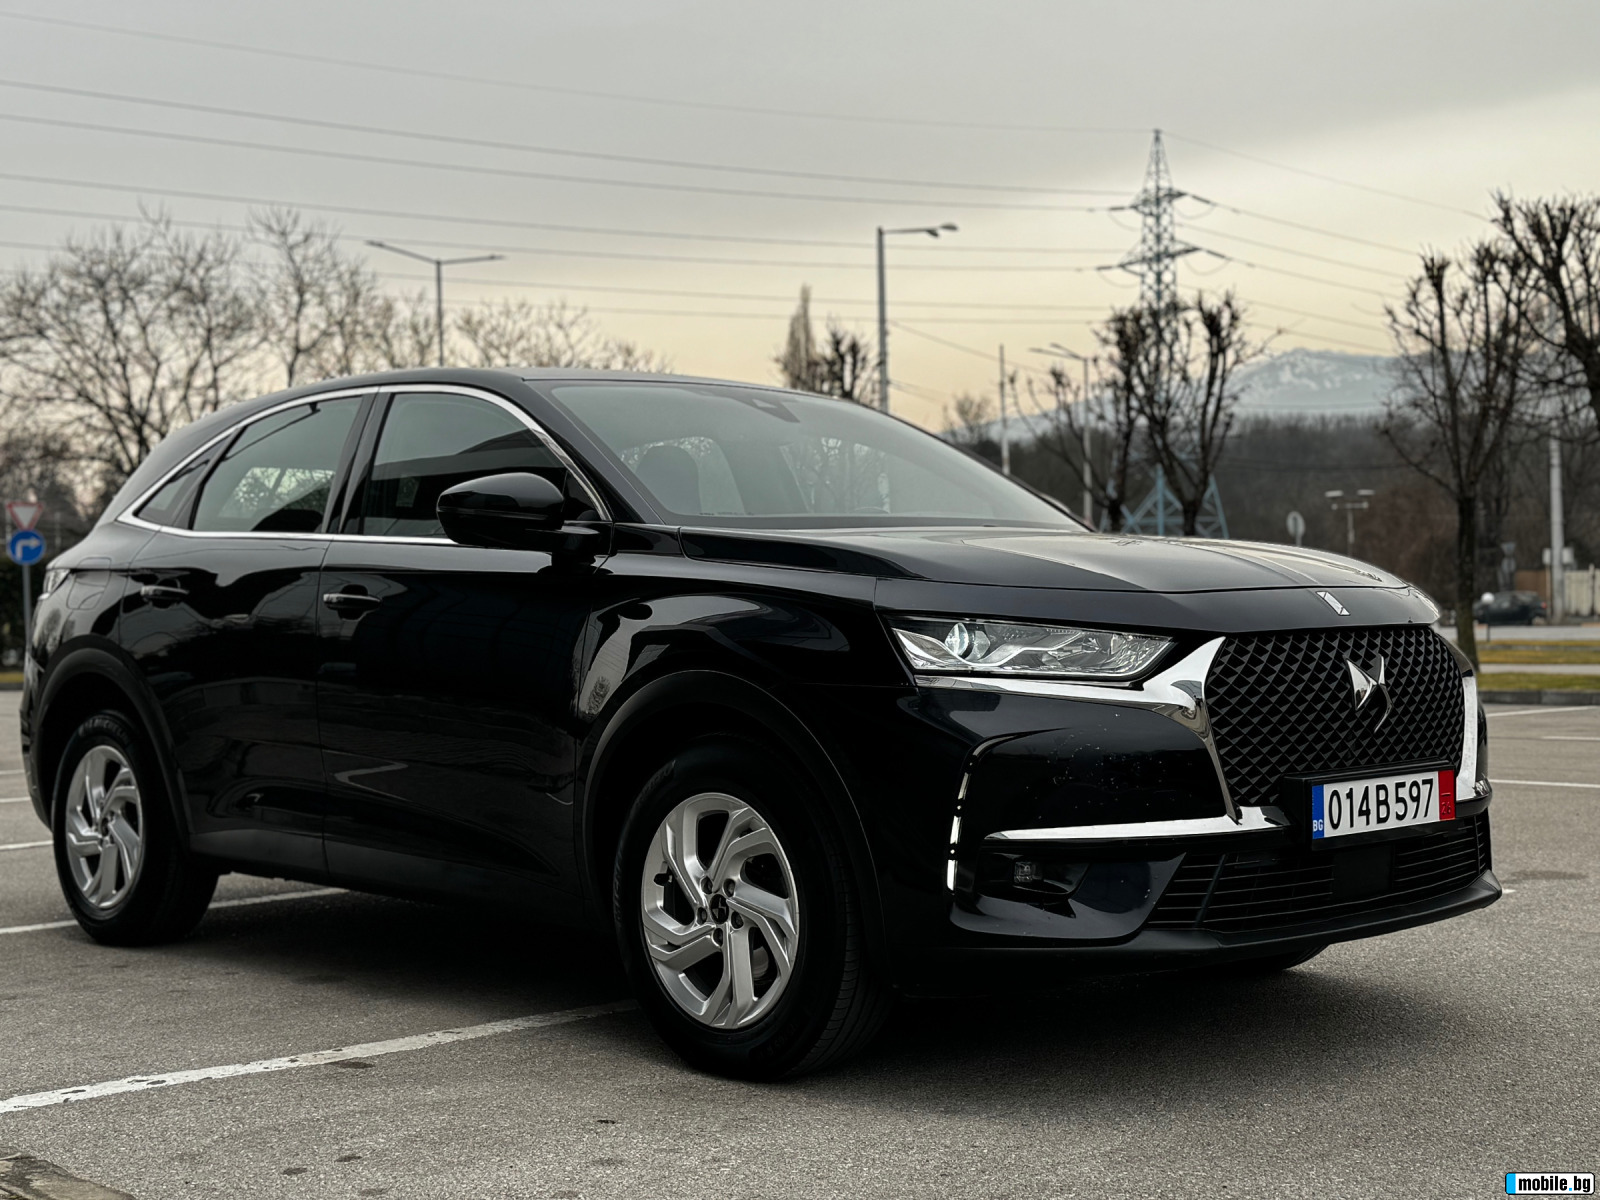 DS DS 7 Crossback Crossback 2.0 HDI Business | Mobile.bg   5